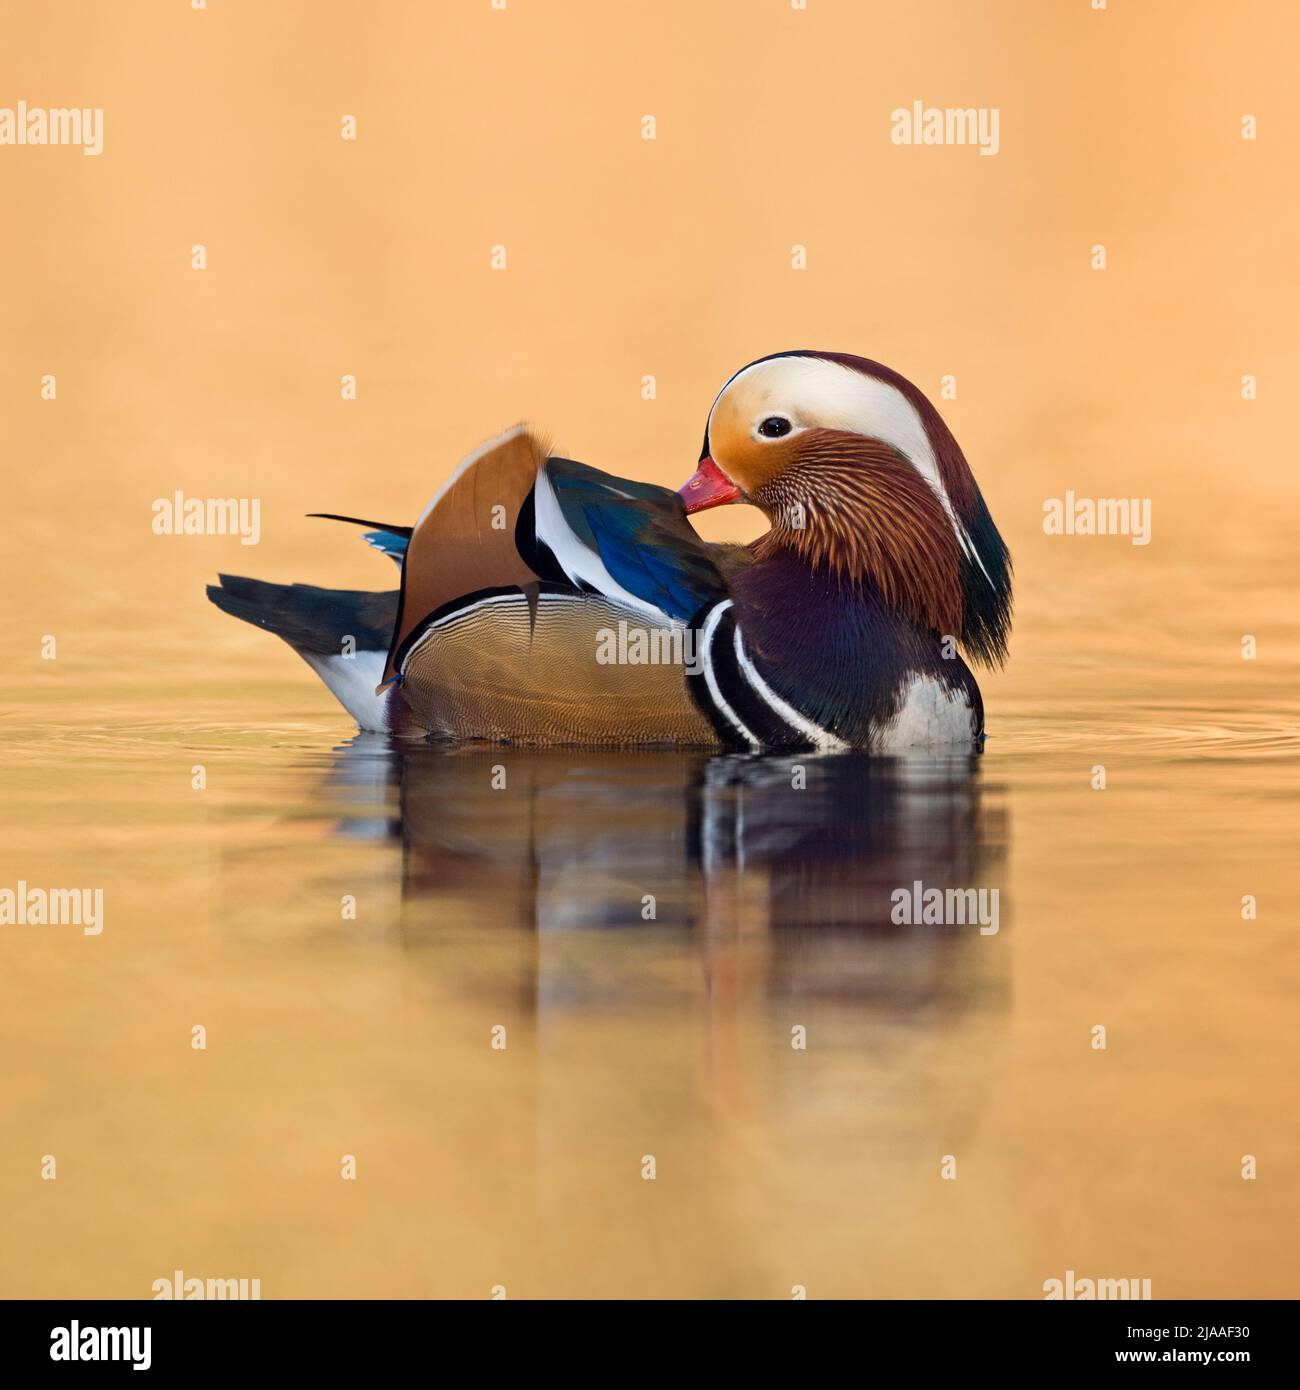 Mandarin Duck / Mandarinente ( Aix galericulata ), pretty male, cleaning its feathers, taking care of its plumage, golden october light, Europe. Stock Photo